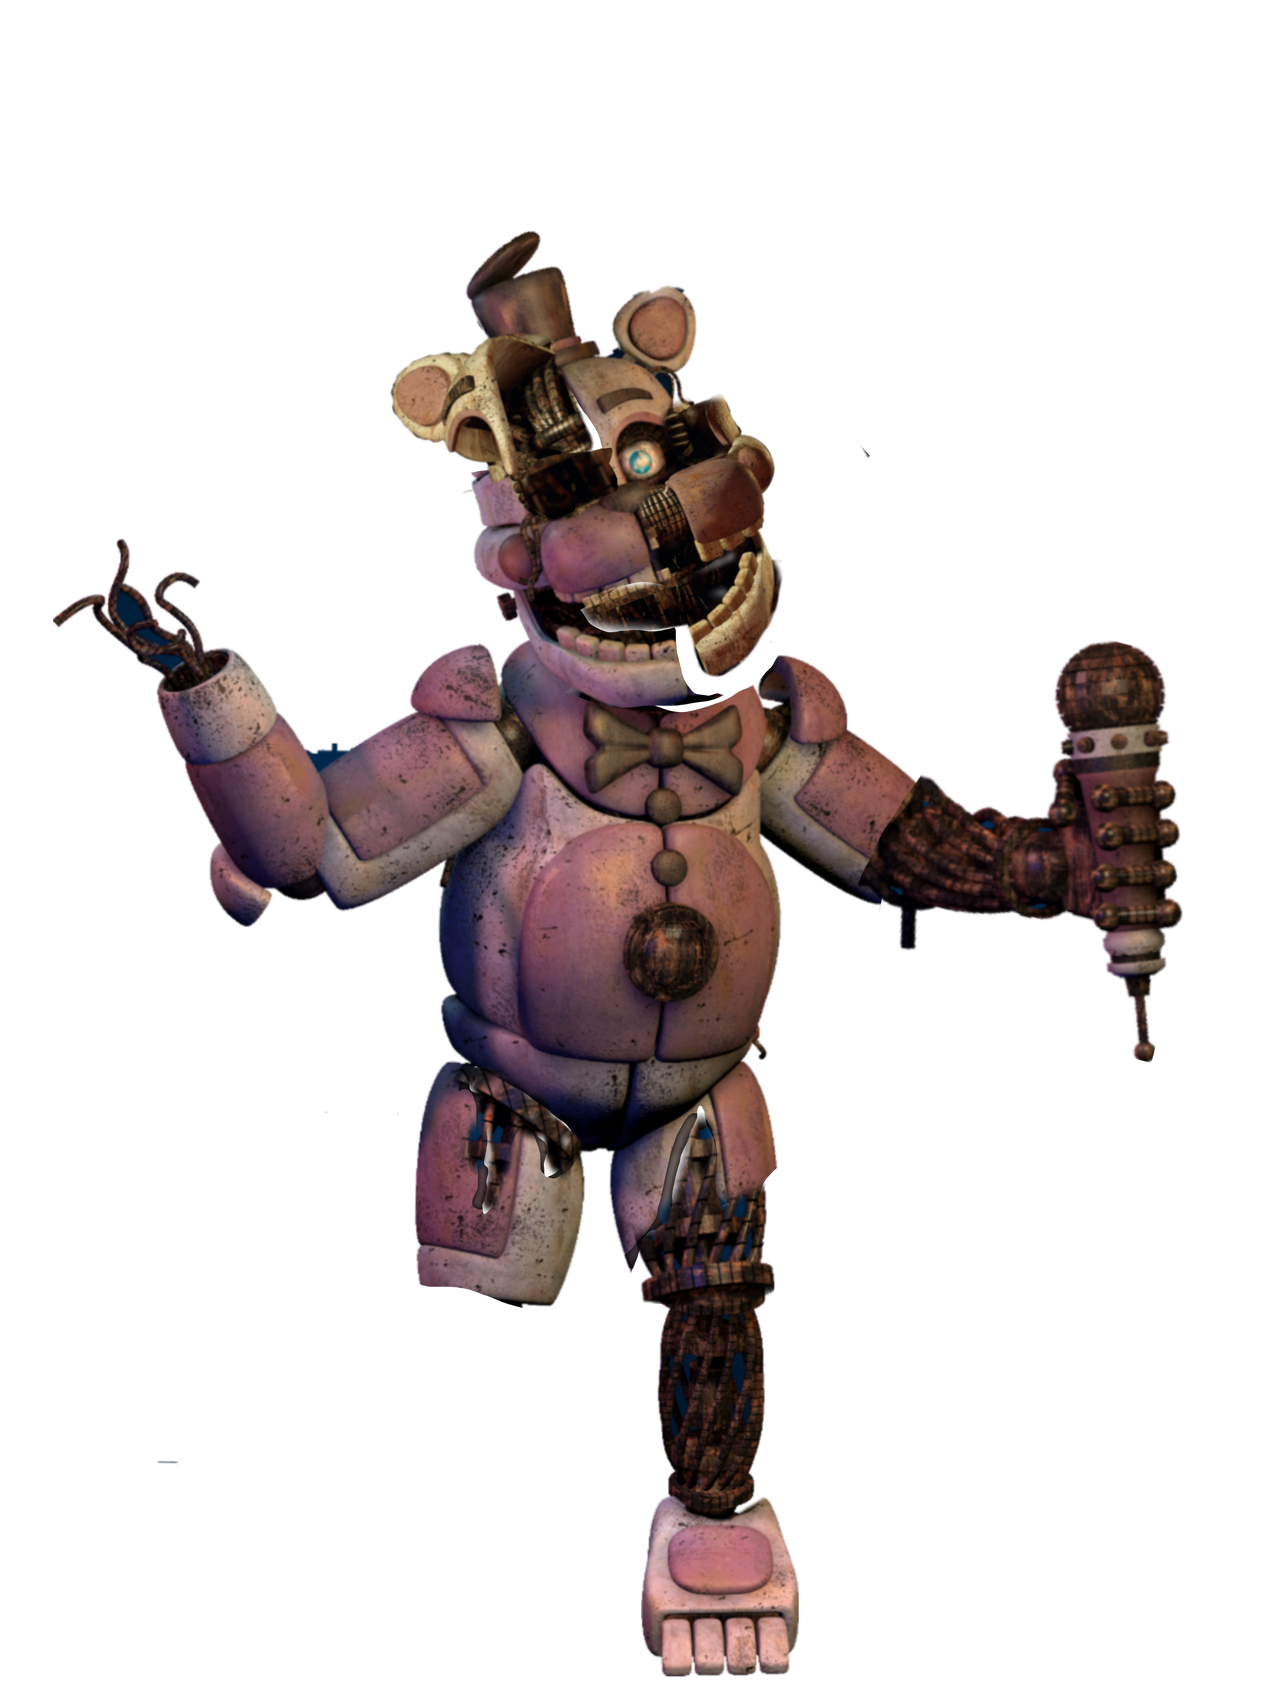 Swapped withered foxy by fnafspeedfan2 on DeviantArt